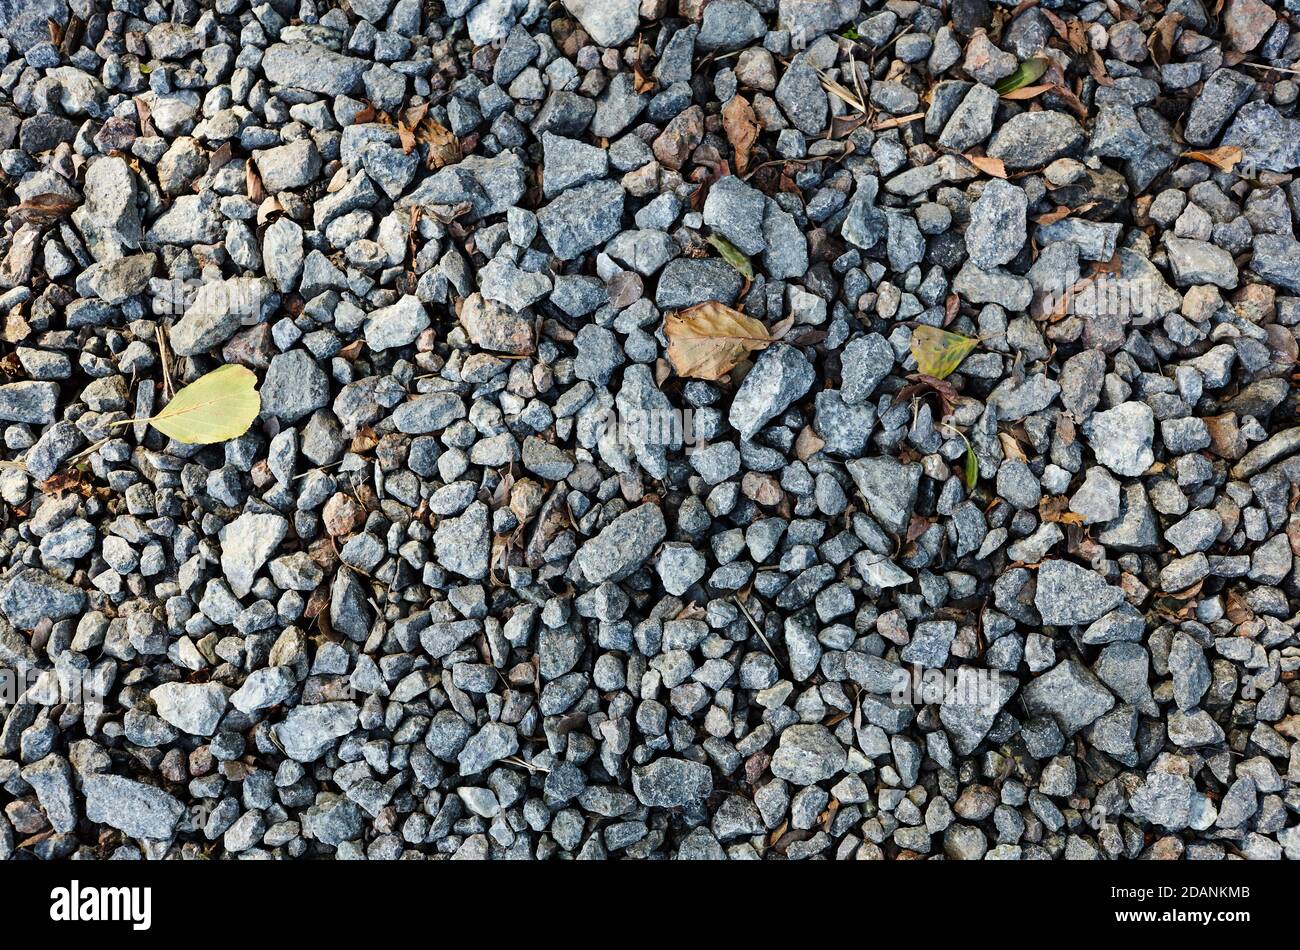 Grey ground stone rubble road background. Natural gray granite chippings, macadam, rubble or crushed stones texture, top view Stock Photo